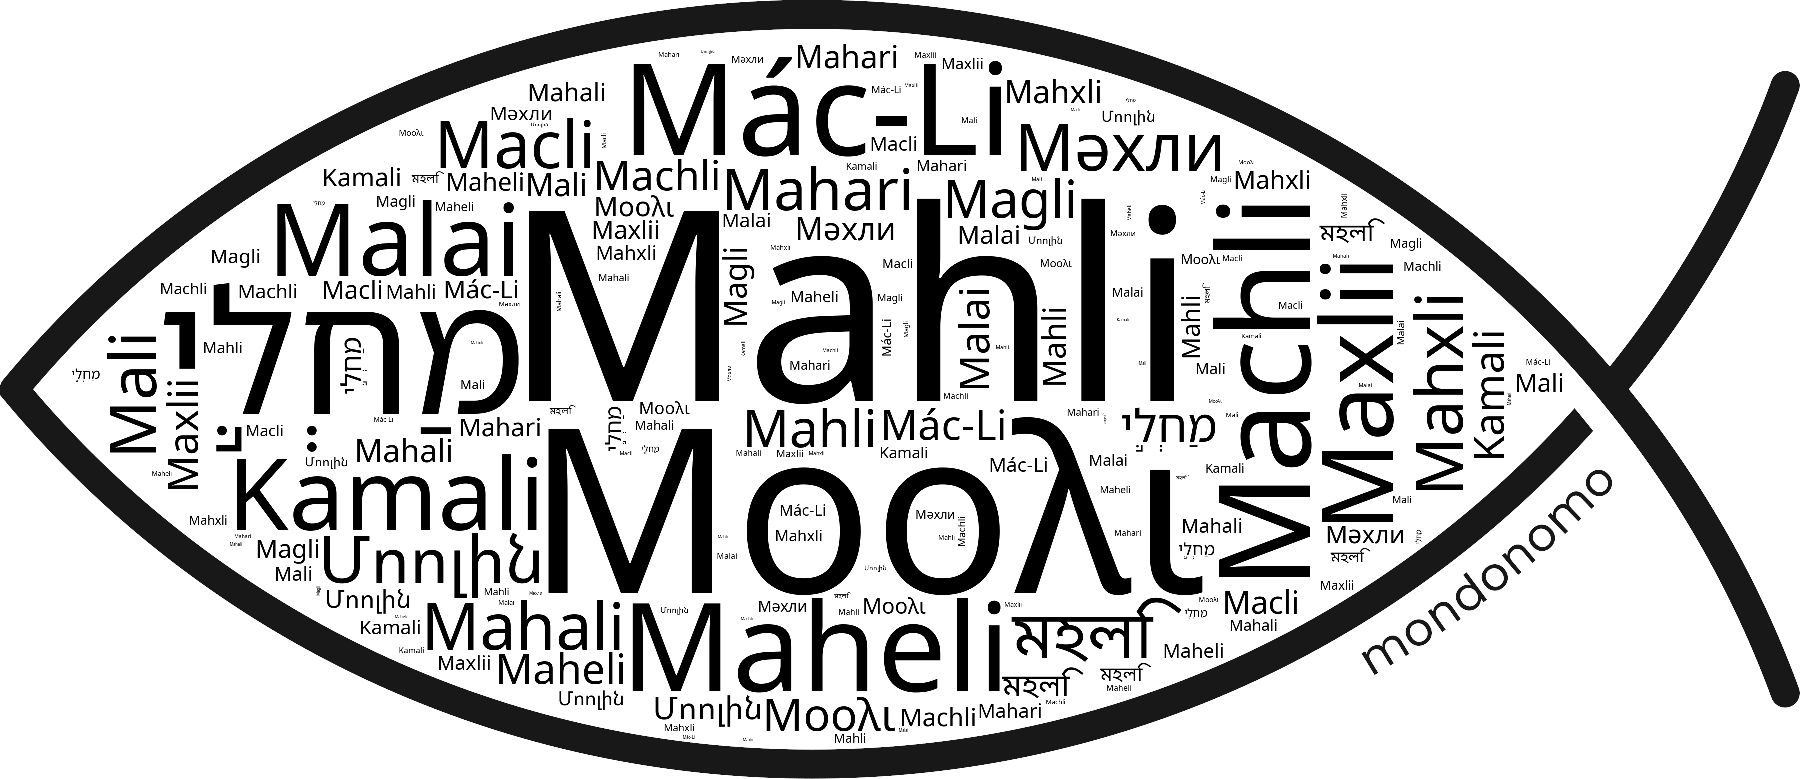 Name Mahli in the world's Bibles